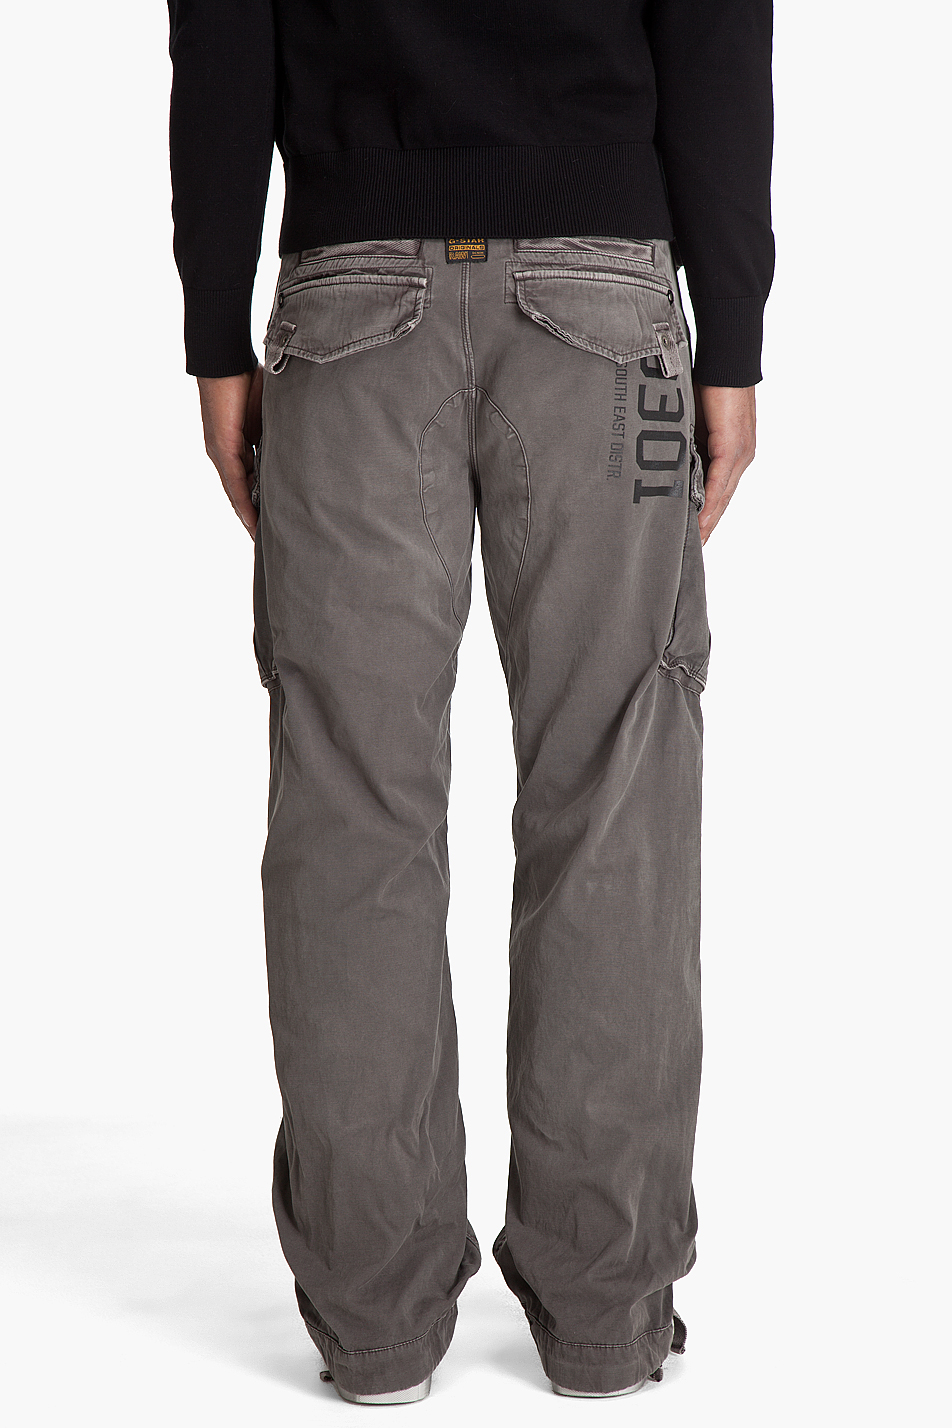 Lyst - G-star raw Rovic Loose Cargo Pants in Brown for Men